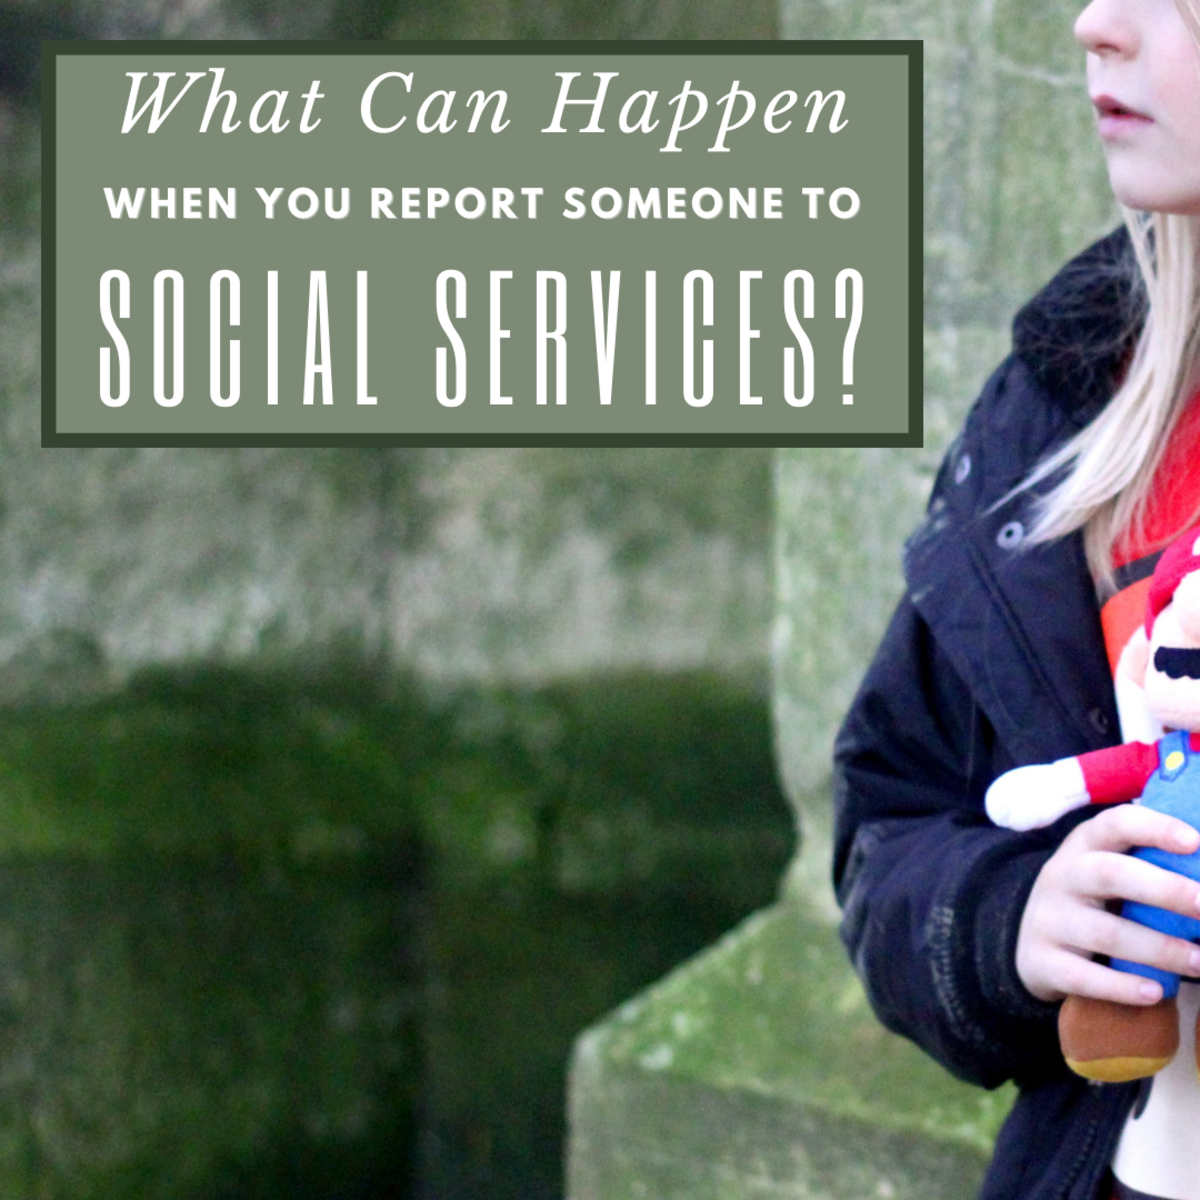 The decision to report someone to social services is never taken lightly.